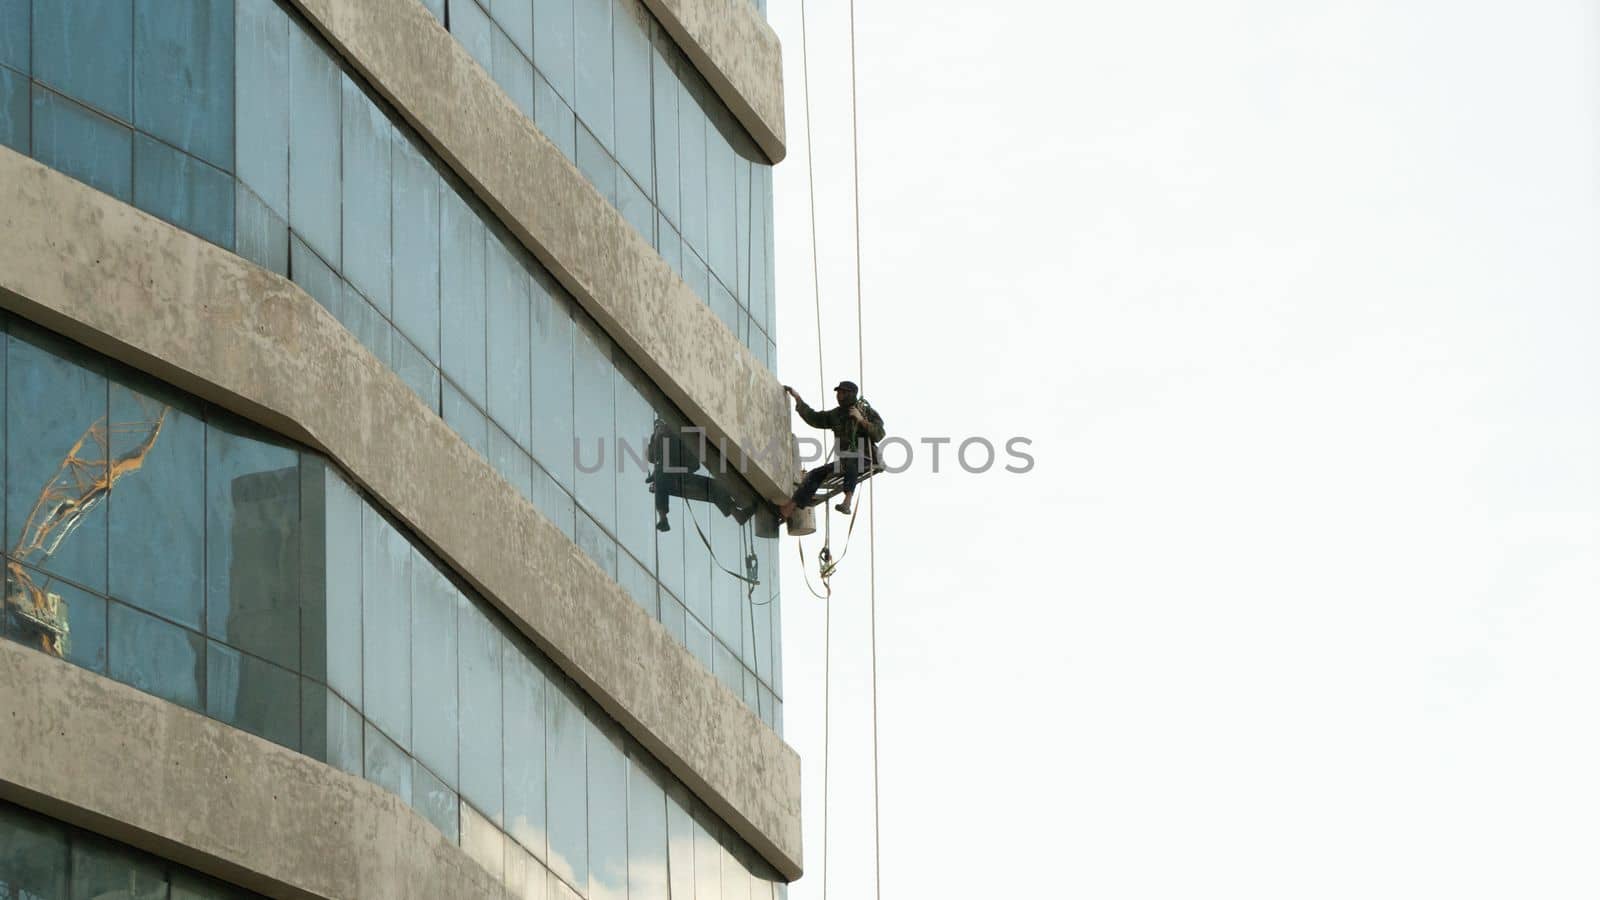 High-altitude work of an industrial climber on a building by voktybre